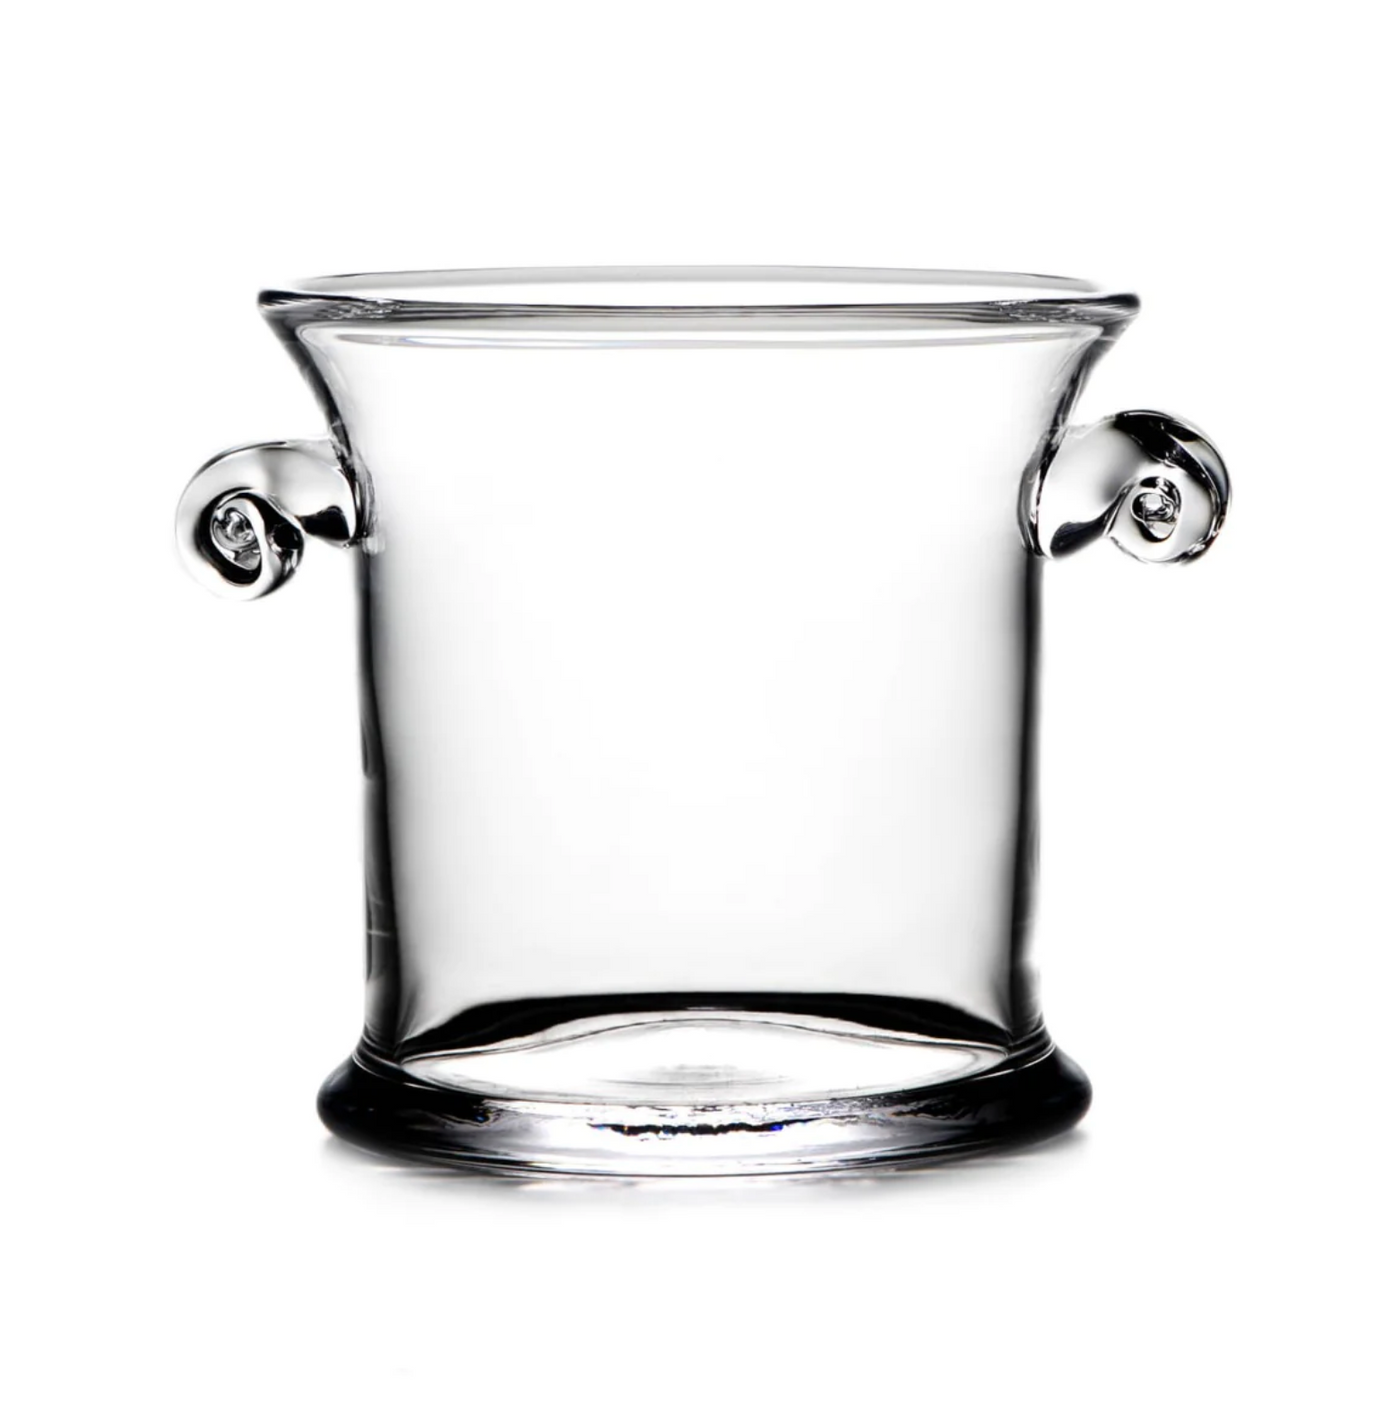 SIMON PEARCE ICE BUCKET NORWICH (Available in 2 Sizes)